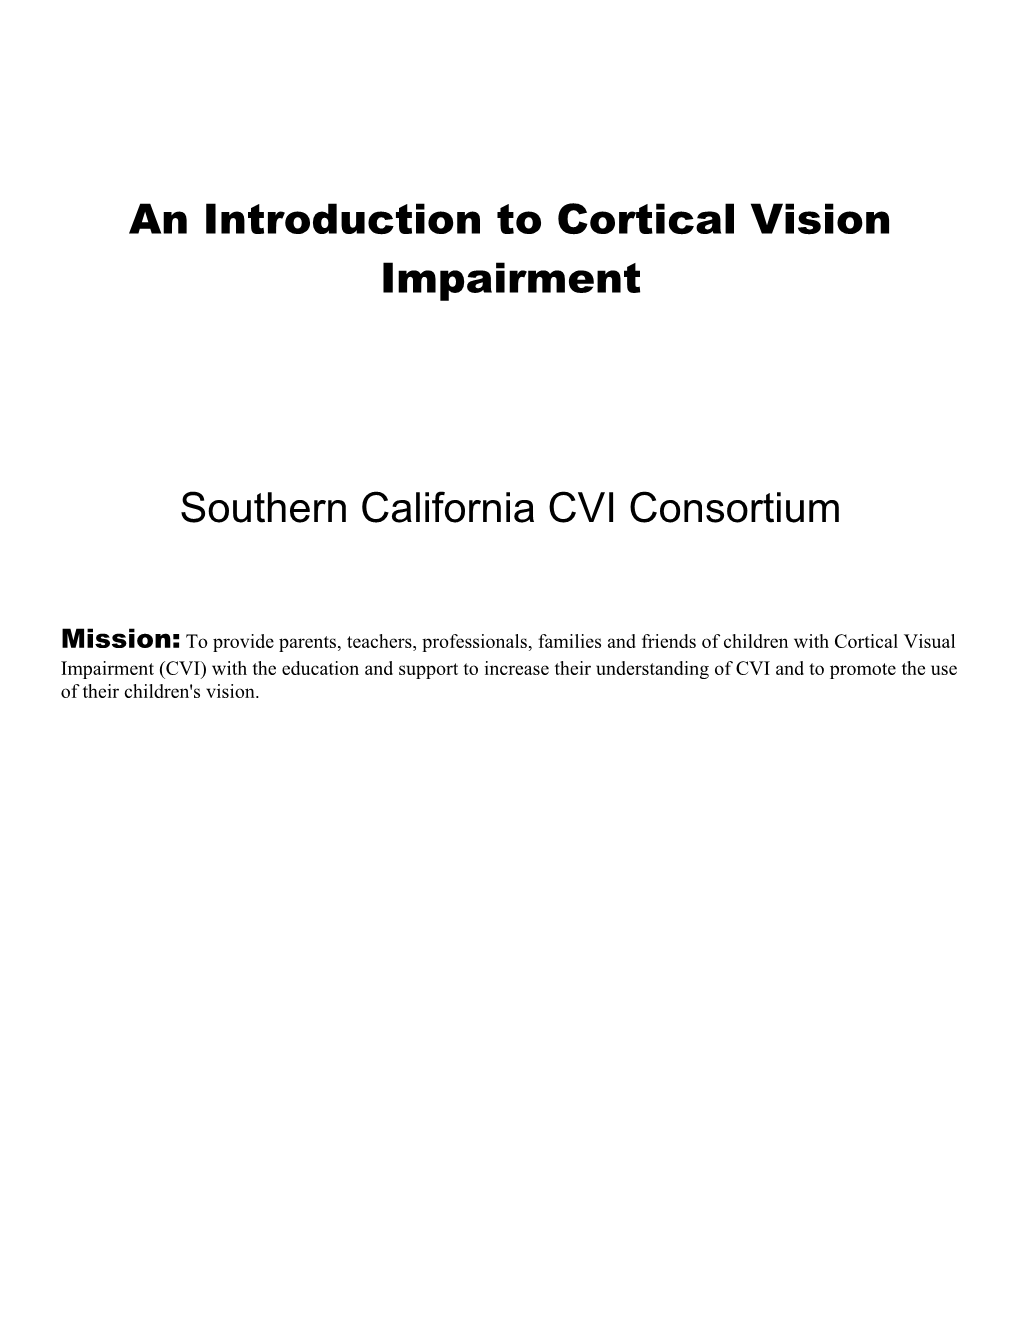 An Introduction to Cortical Vision Impairment